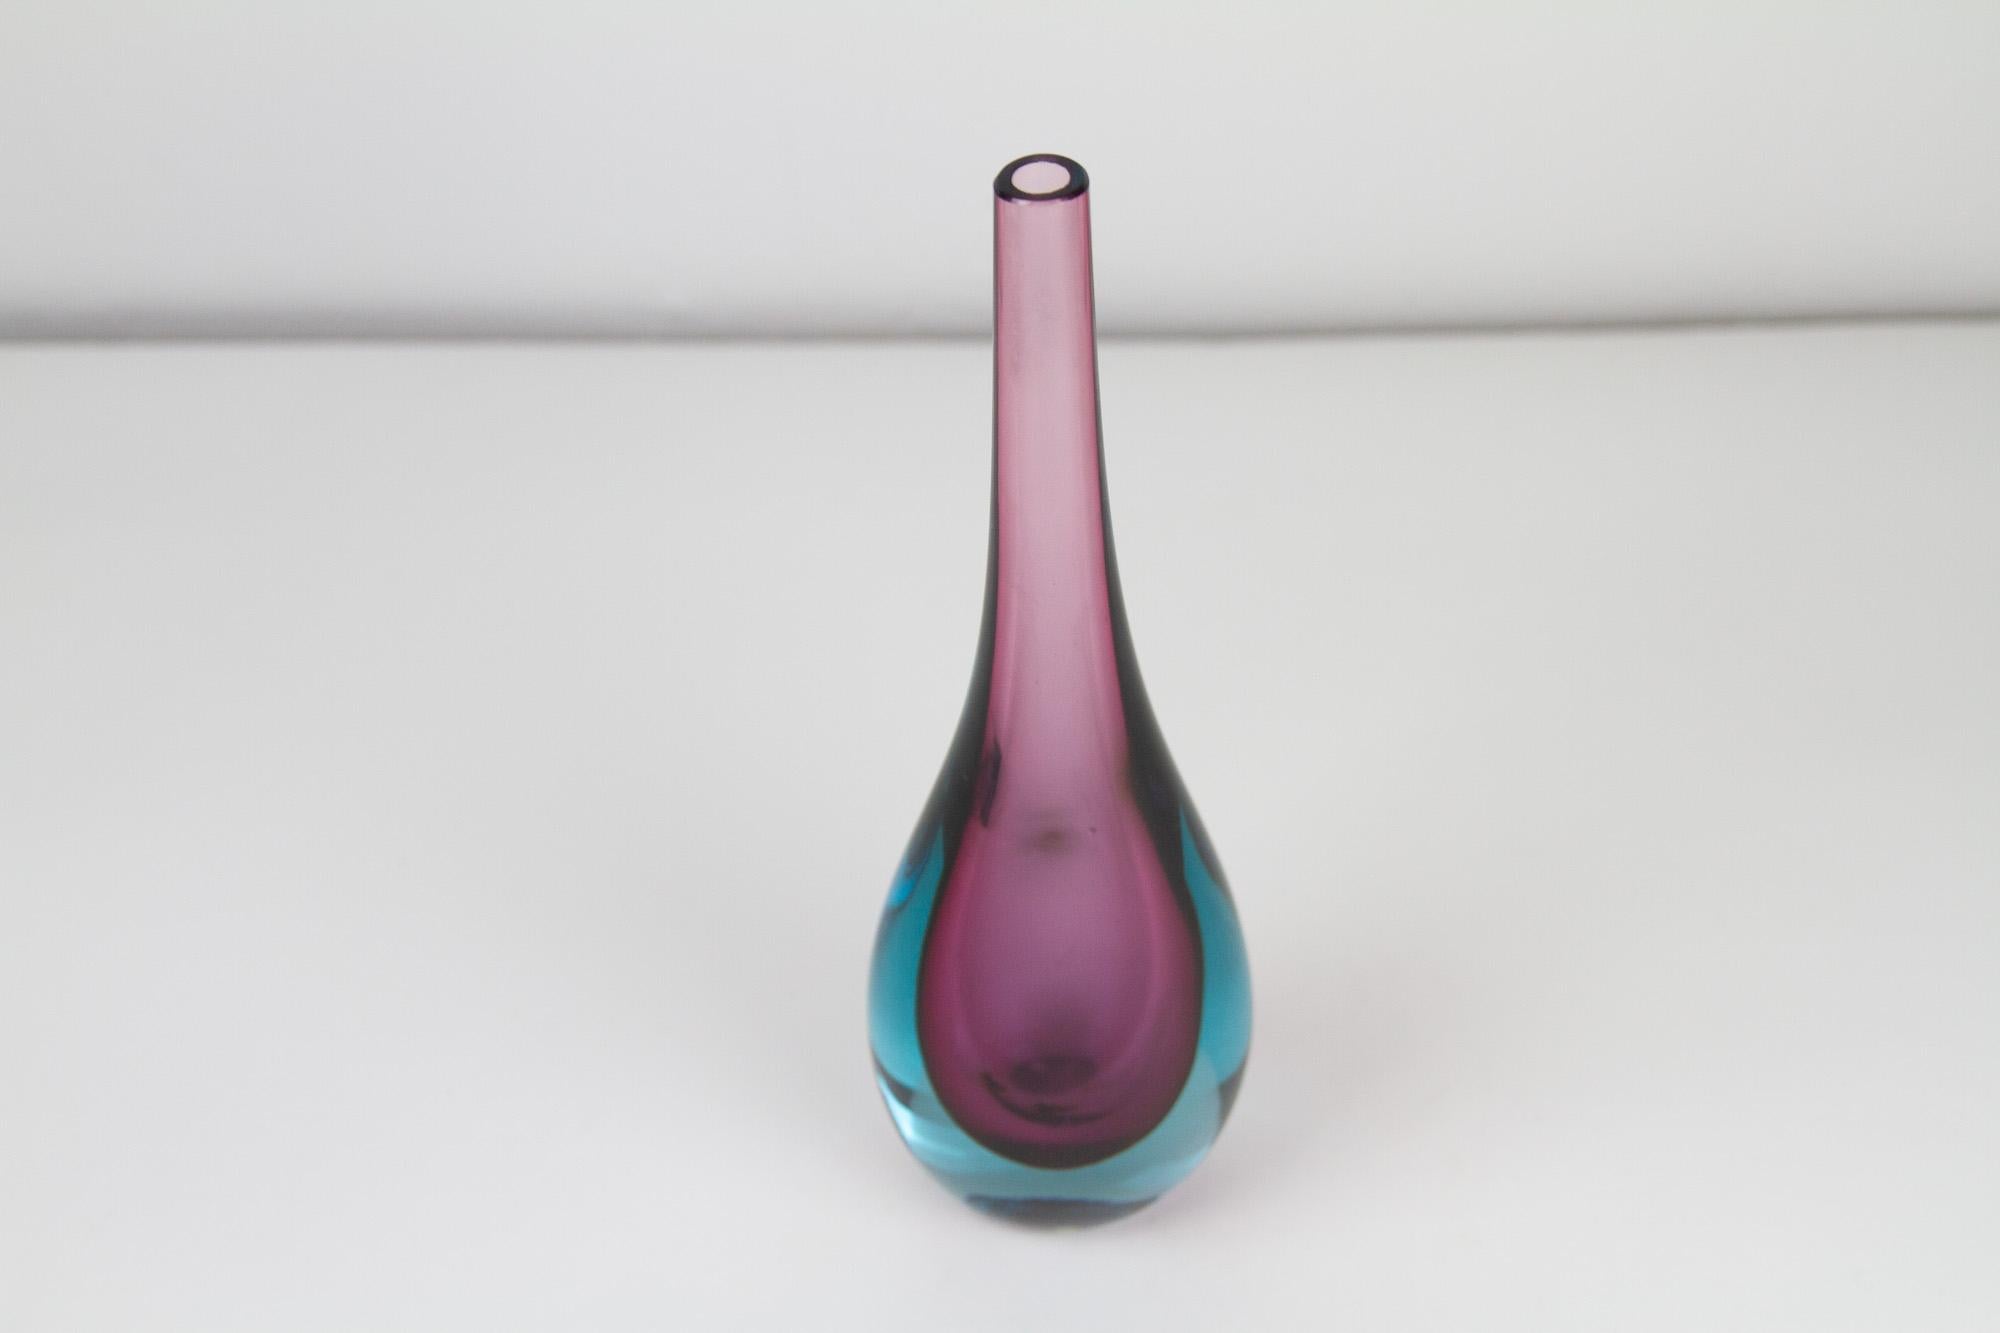 Vintage Murano Teardrop Sommerso vase 1960s
Beautiful Murano vase in clear, ice blue and purple glass hand blown on Murano Island by using the Sommerso technique of layering different colors of glass.
Height 25.5 cm.
Very good vintage condition